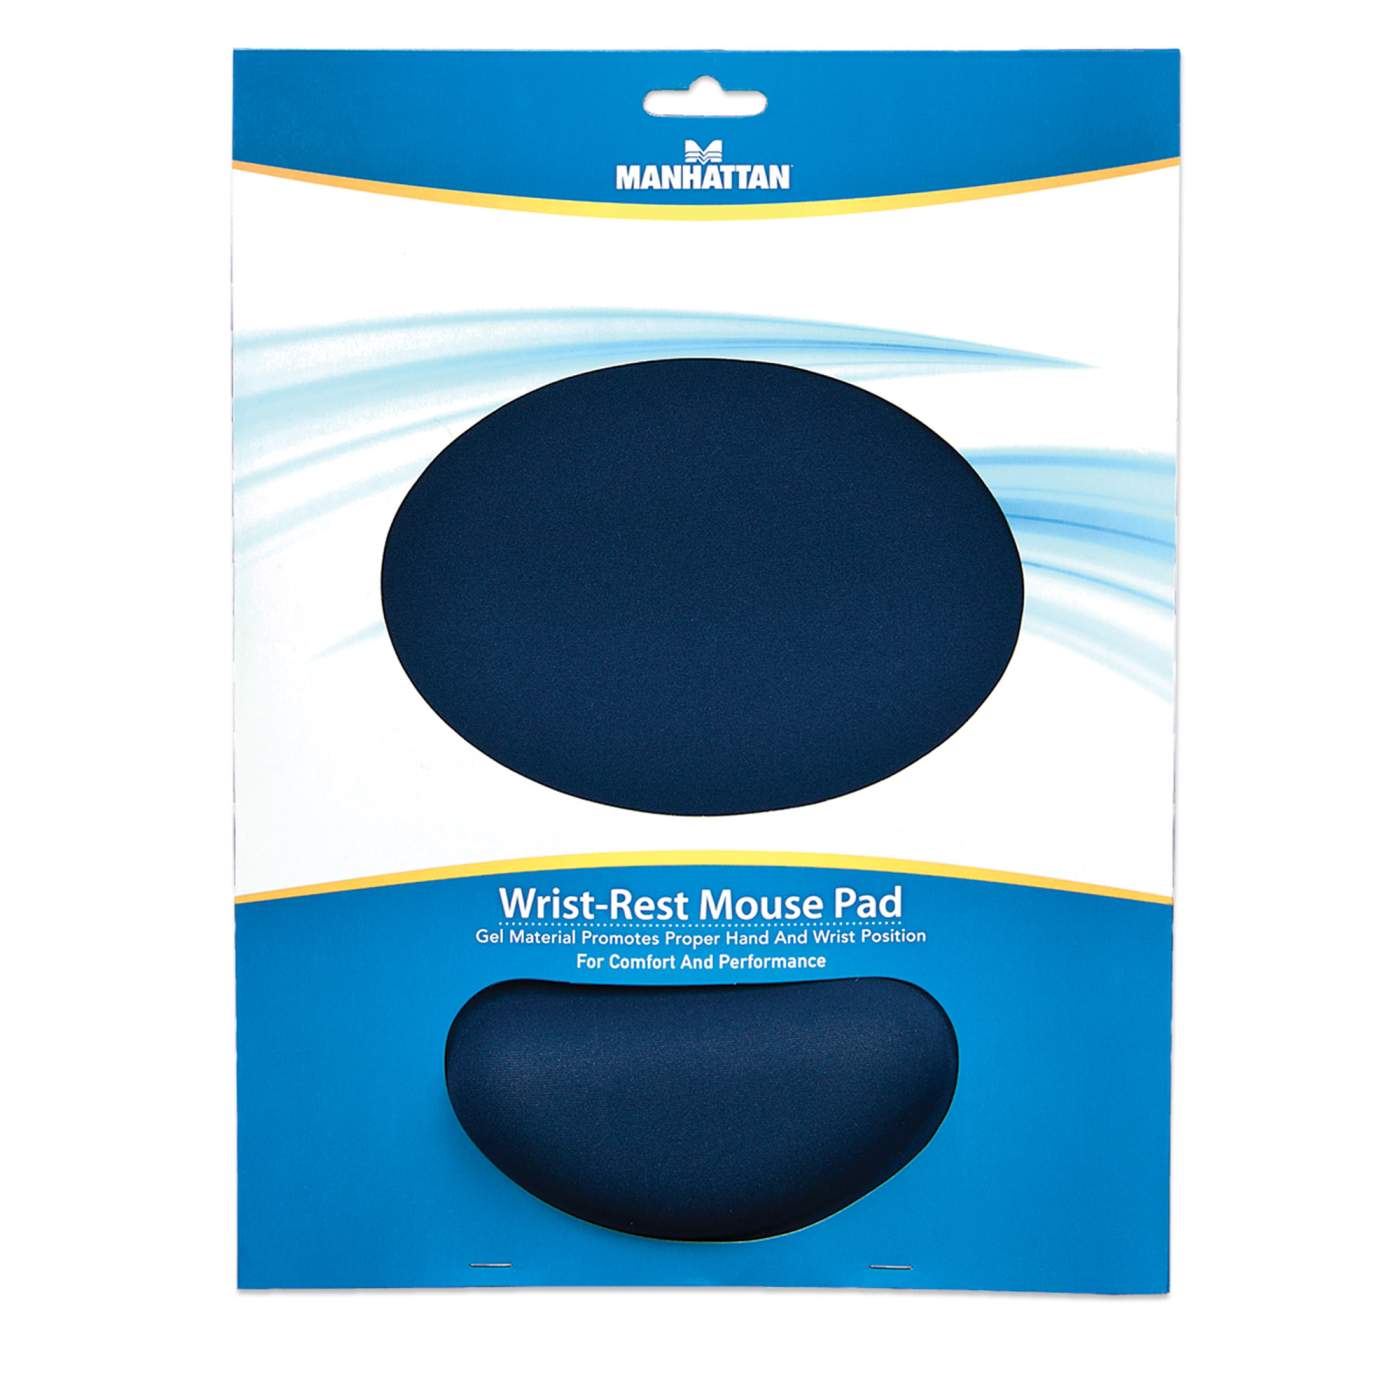 Ergonomic Wrist Rest Mouse Pad Packaging Image 2